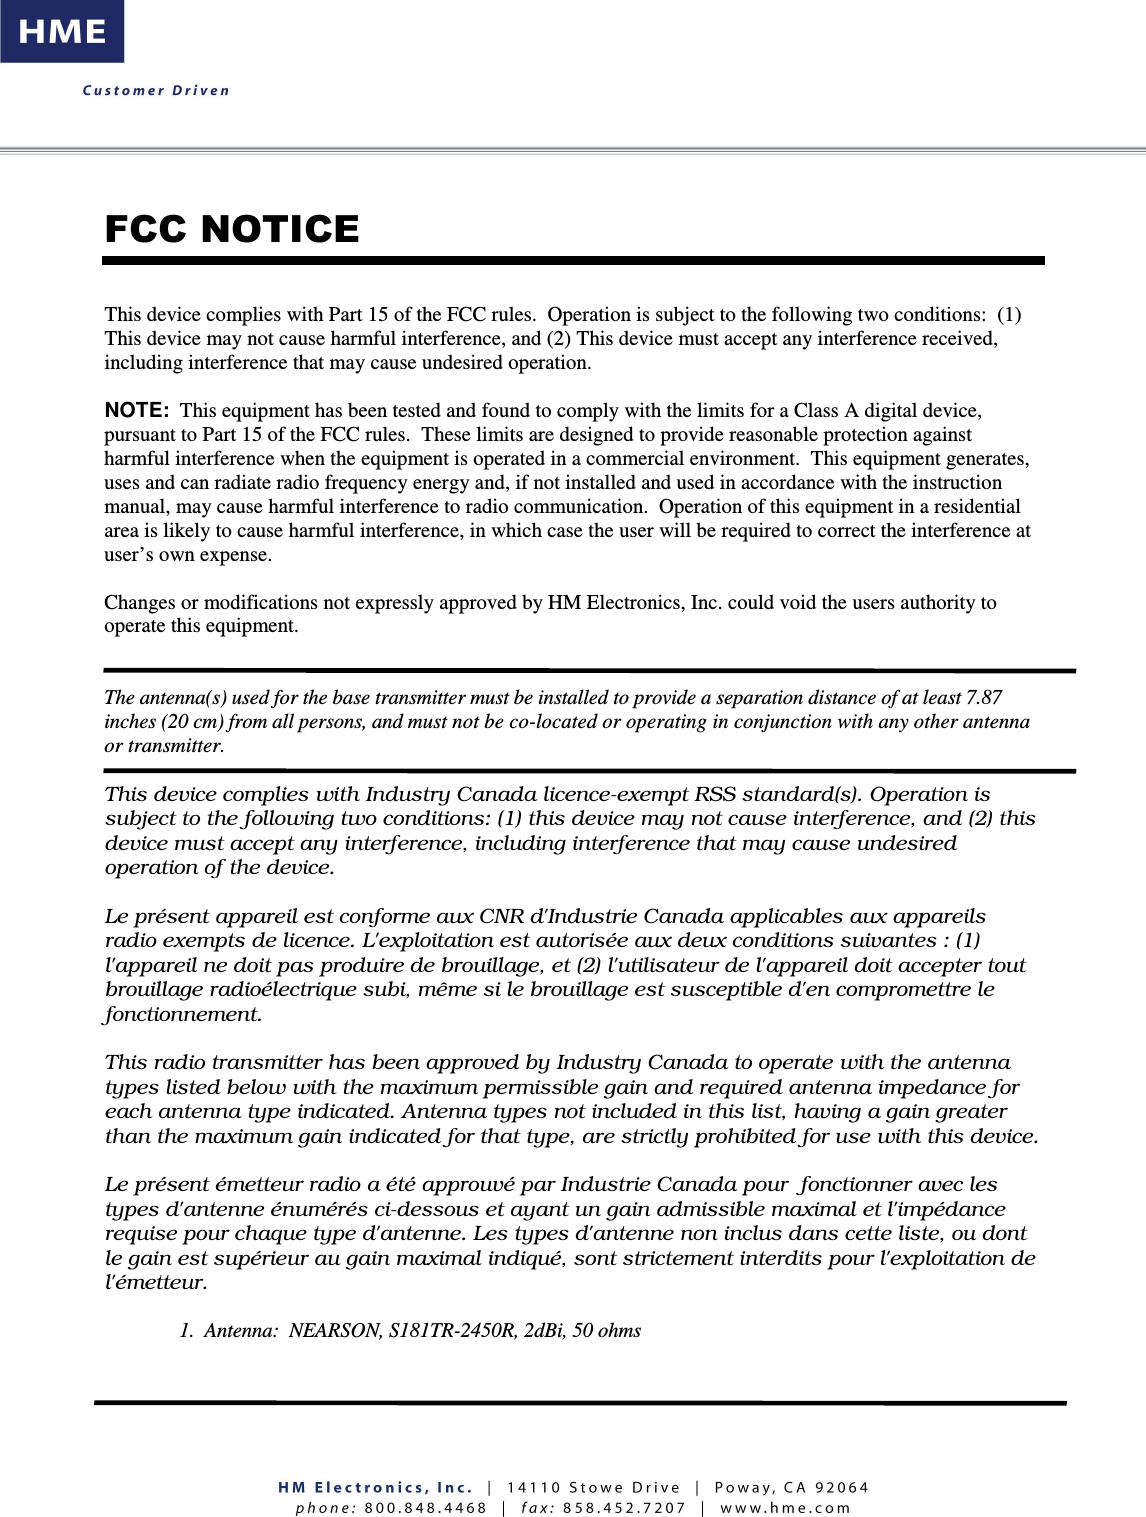    FCC NOTICE This device complies with Part 15 of the FCC rules.  Operation is subject to the following two conditions:  (1) This device may not cause harmful interference, and (2) This device must accept any interference received, including interference that may cause undesired operation.  NOTE:  This equipment has been tested and found to comply with the limits for a Class A digital device, pursuant to Part 15 of the FCC rules.  These limits are designed to provide reasonable protection against harmful interference when the equipment is operated in a commercial environment.  This equipment generates, uses and can radiate radio frequency energy and, if not installed and used in accordance with the instruction manual, may cause harmful interference to radio communication.  Operation of this equipment in a residential area is likely to cause harmful interference, in which case the user will be required to correct the interference at user’s own expense.  Changes or modifications not expressly approved by HM Electronics, Inc. could void the users authority to operate this equipment.   The antenna(s) used for the base transmitter must be installed to provide a separation distance of at least 7.87 inches (20 cm) from all persons, and must not be co-located or operating in conjunction with any other antenna or transmitter.  This device complies with Industry Canada licence-exempt RSS standard(s). Operation is subject to the following two conditions: (1) this device may not cause interference, and (2) this device must accept any interference, including interference that may cause undesired operation of the device.   Le présent appareil est conforme aux CNR d&apos;Industrie Canada applicables aux appareils radio exempts de licence. L&apos;exploitation est autorisée aux deux conditions suivantes : (1) l&apos;appareil ne doit pas produire de brouillage, et (2) l&apos;utilisateur de l&apos;appareil doit accepter tout brouillage radioélectrique subi, même si le brouillage est susceptible d&apos;en compromettre le fonctionnement.  This radio transmitter has been approved by Industry Canada to operate with the antenna types listed below with the maximum permissible gain and required antenna impedance for each antenna type indicated. Antenna types not included in this list, having a gain greater than the maximum gain indicated for that type, are strictly prohibited for use with this device.  Le présent émetteur radio a été approuvé par Industrie Canada pour  fonctionner avec les types d&apos;antenne énumérés ci-dessous et ayant un gain admissible maximal et l&apos;impédance requise pour chaque type d&apos;antenne. Les types d&apos;antenne non inclus dans cette liste, ou dont le gain est supérieur au gain maximal indiqué, sont strictement interdits pour l&apos;exploitation de l&apos;émetteur.     1.  Antenna:  NEARSON, S181TR-2450R, 2dBi, 50 ohms    